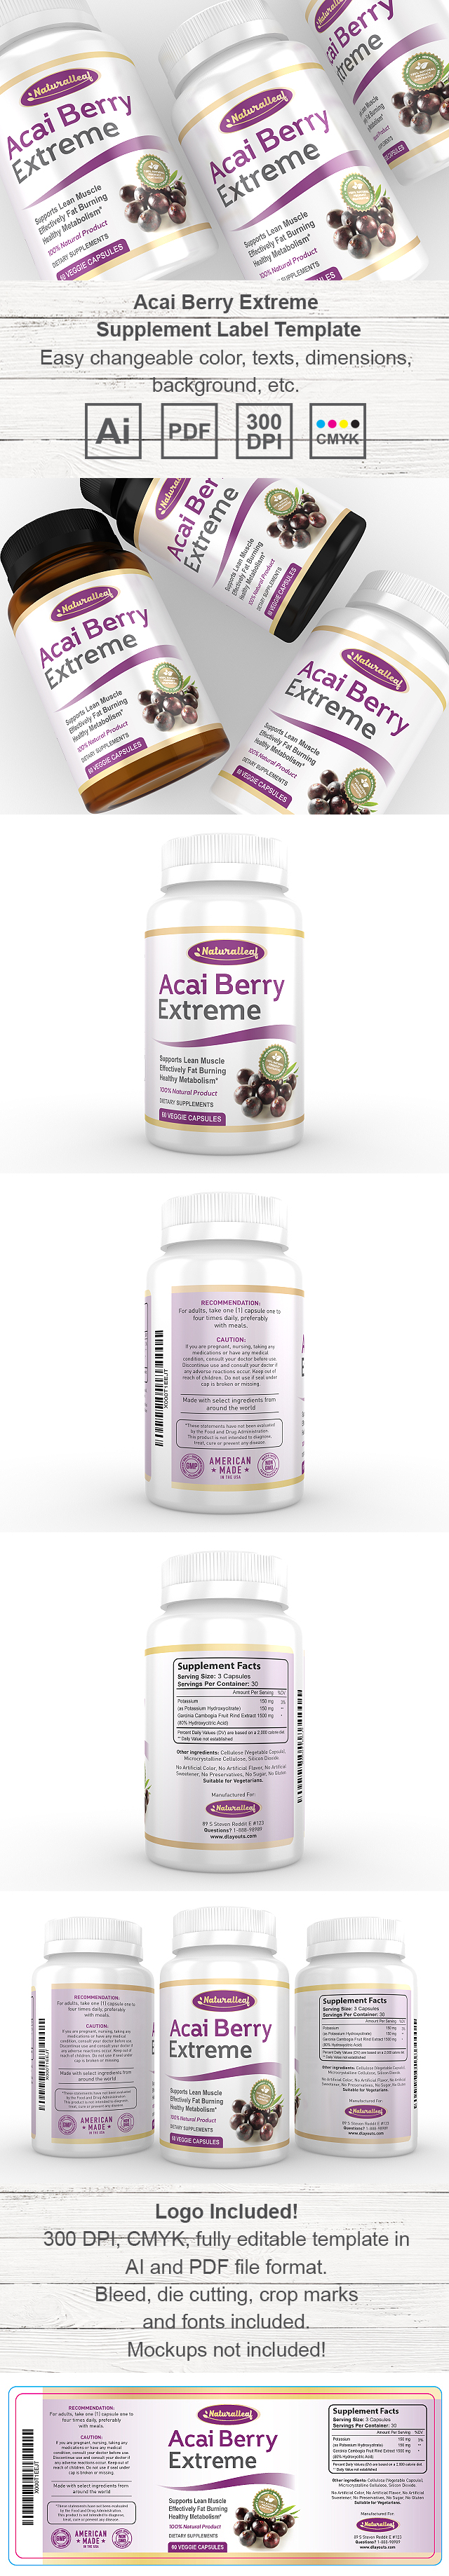 Acai Berry Weight Loss Supplement Label Template